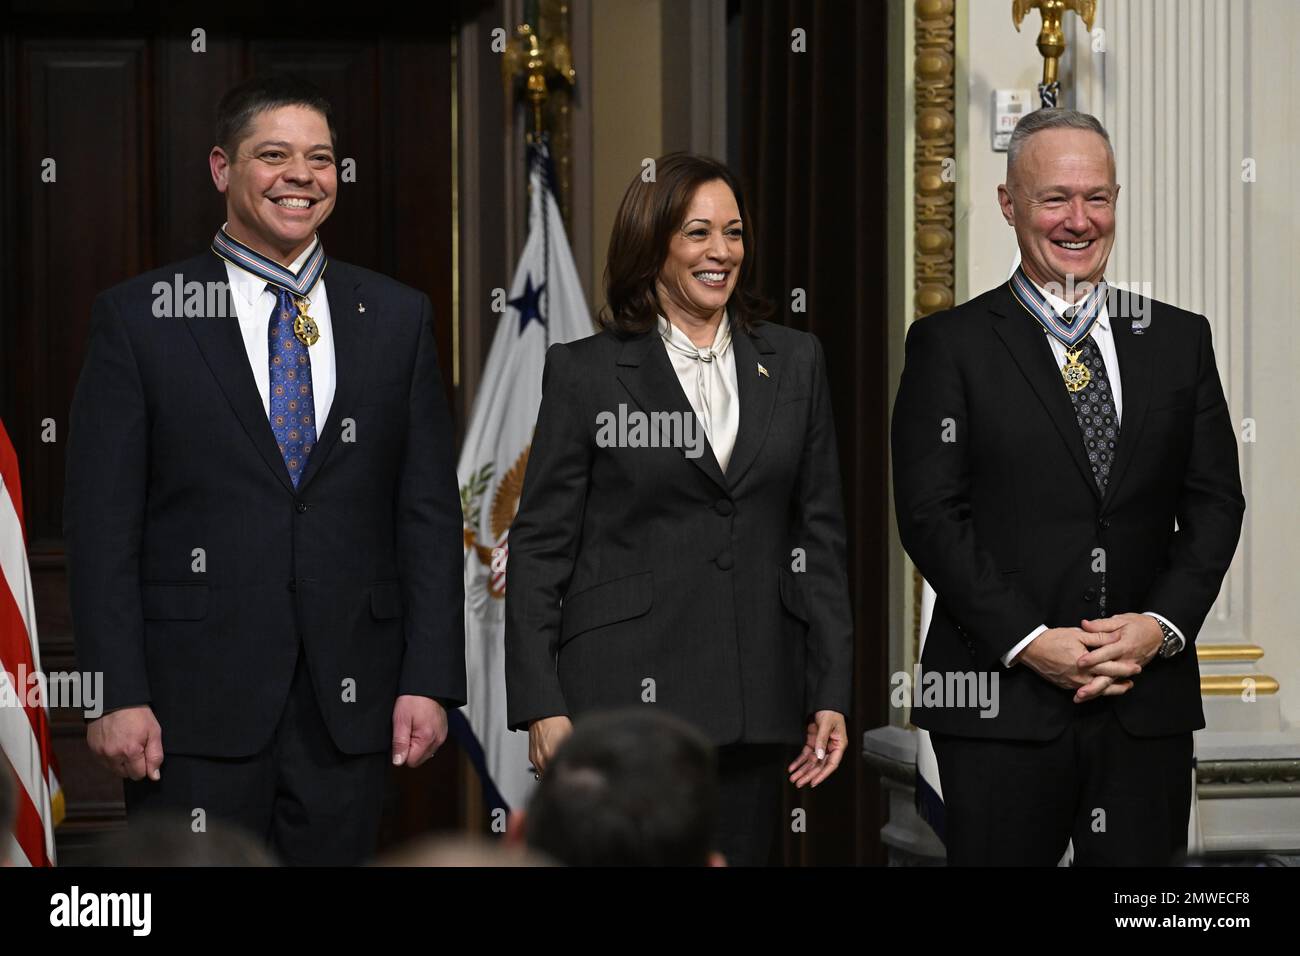 Washington, United States of America. 31 January, 2023. U.S Vice President Kamala Harris, center, stands with former NASA astronaut Douglas Hurley, right, and Robert Behnken, left, after awarding them the Congressional Space Medal of Honor during a ceremony in the Indian Treaty Room of the Eisenhower Executive Office Building at the White House, January 31, 2023 in Washington, DC Hurley and Behnken were awarded the medal for bravery in the NASA SpaceX Demonstration Mission-2 to the International Space Station. Credit: Joel Kowsky/NASA/Alamy Live News Stock Photo